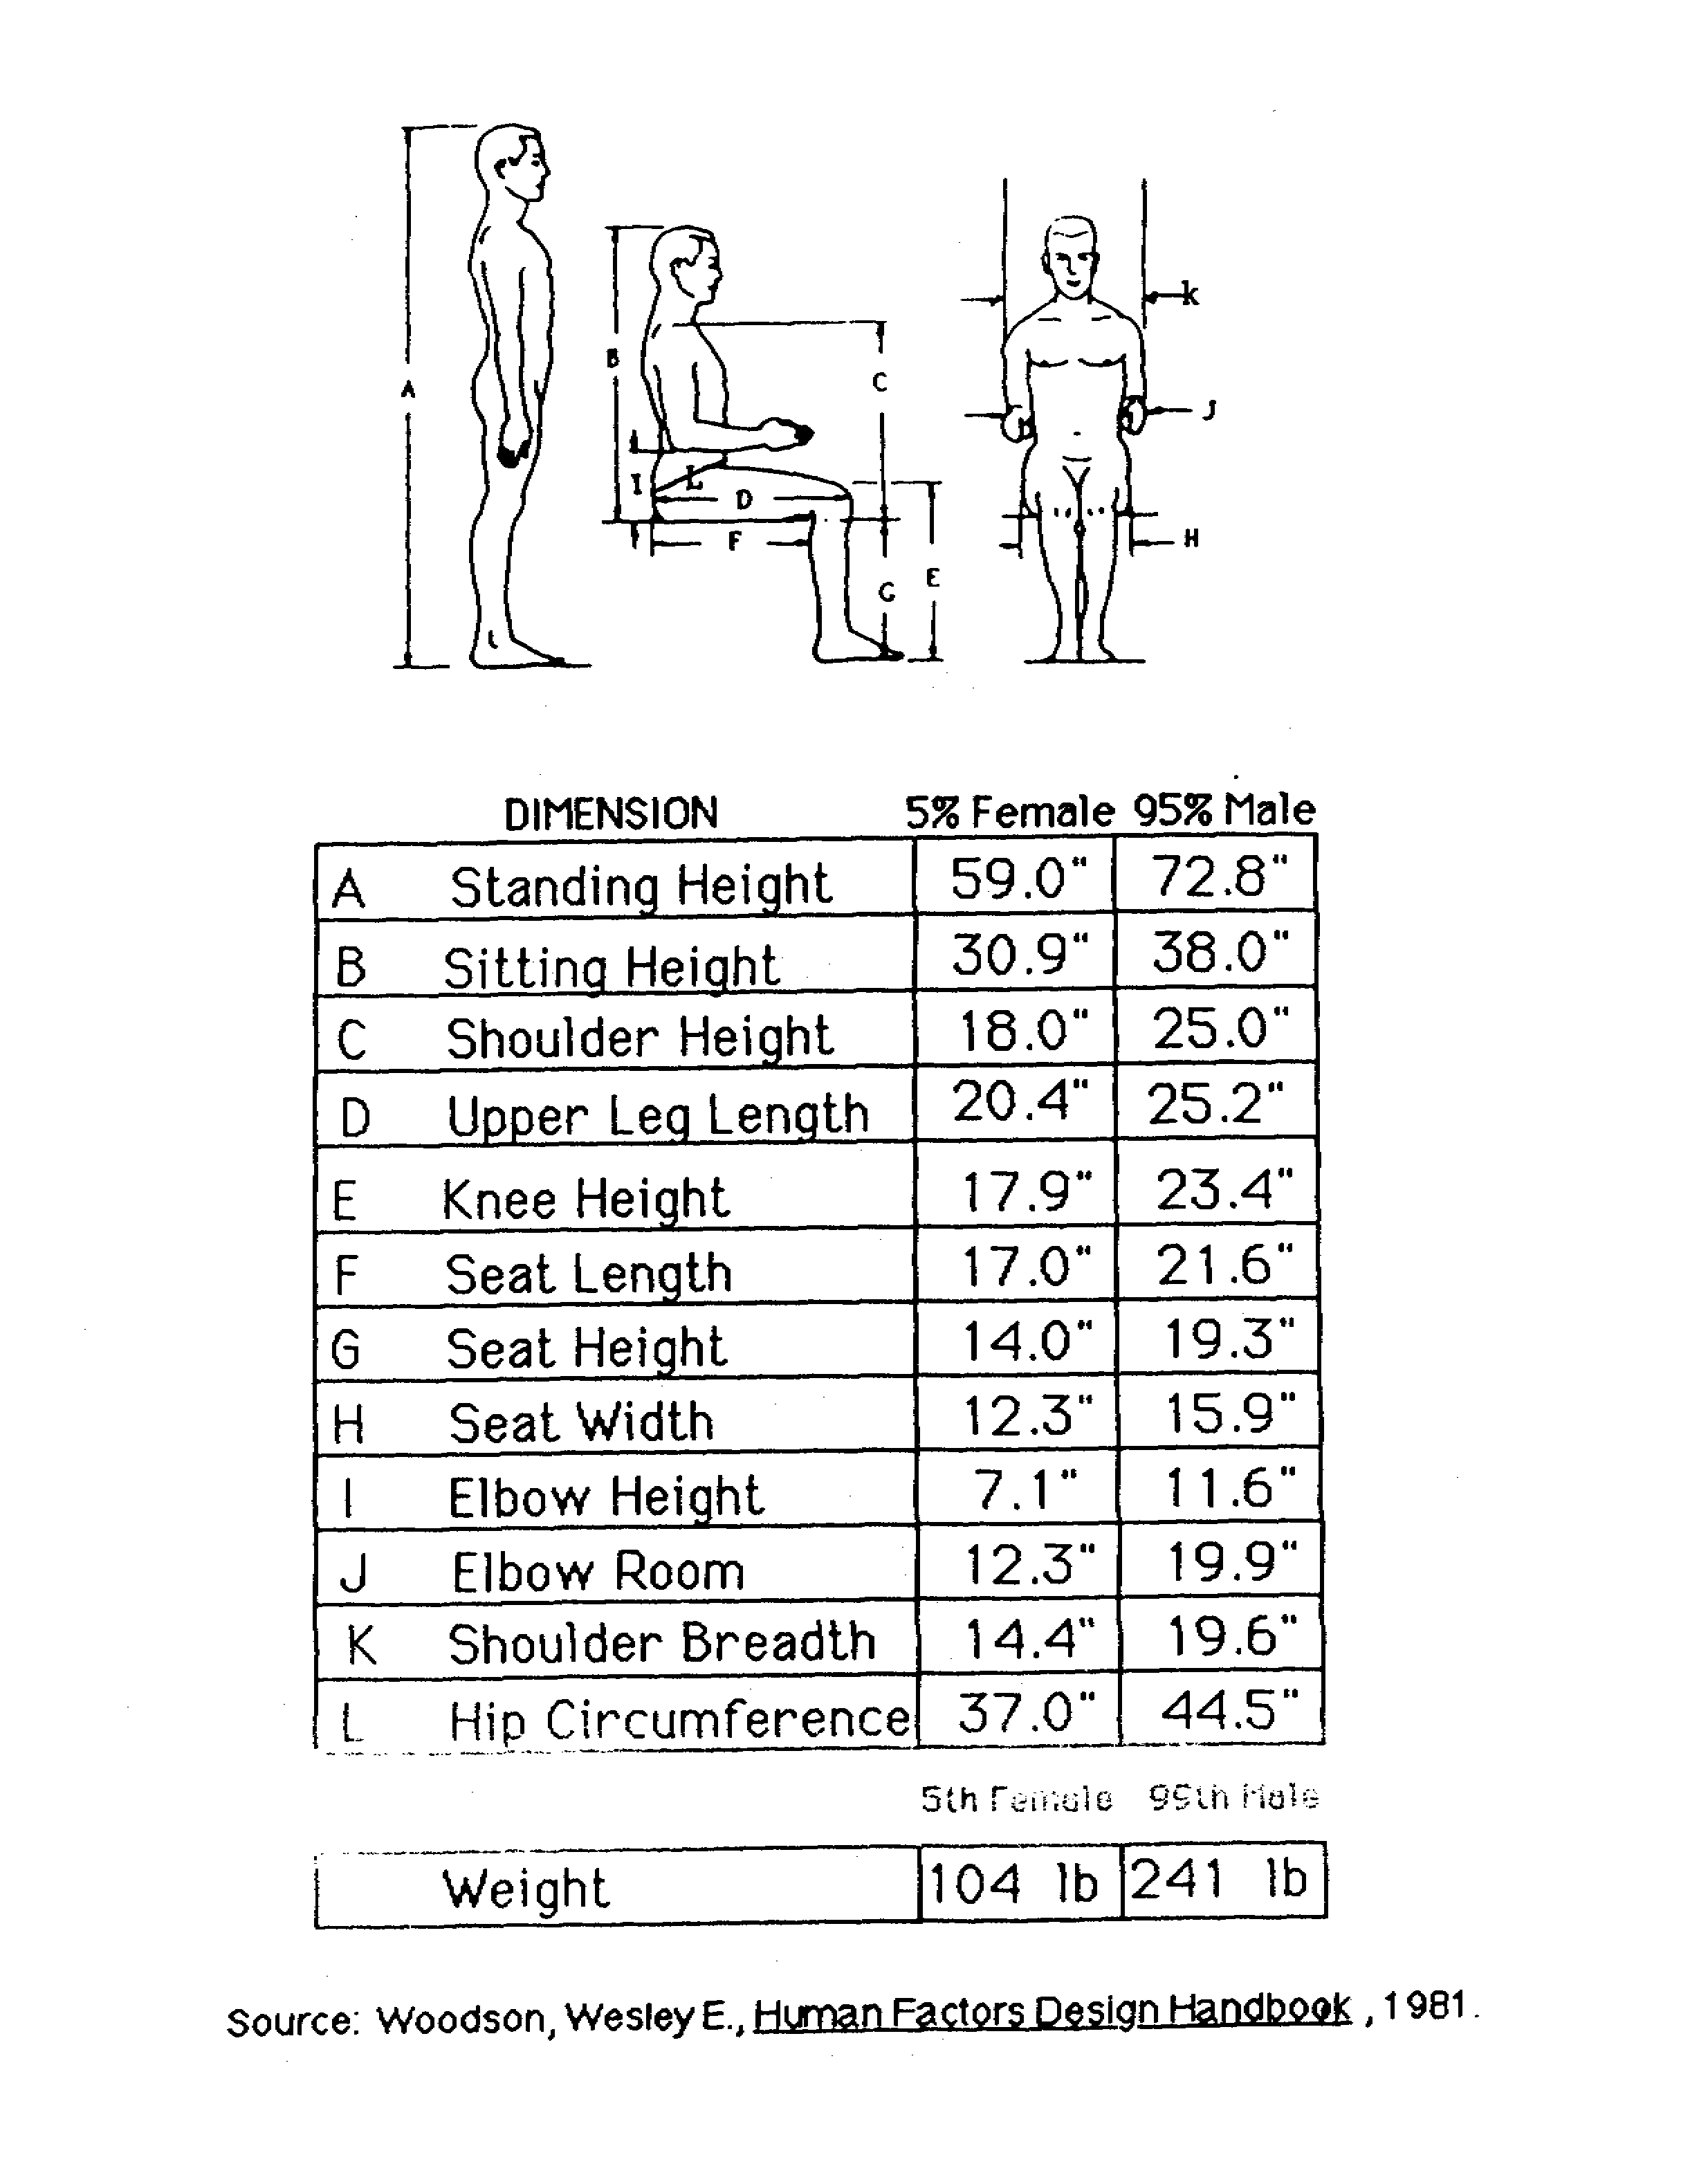 The figure is composed of two parts. The first is a representation of an individual who is standing or sitting and shows specific measures of parts of the body labeled as letters ranging from 'A' to 'L'.  The second is a table of ranges of values corresponding to the labels in the first graphic.  The range is from the 5th female percentile to the 95th male percentile. The individual figures are available by selecting the links at the bottom of this page.